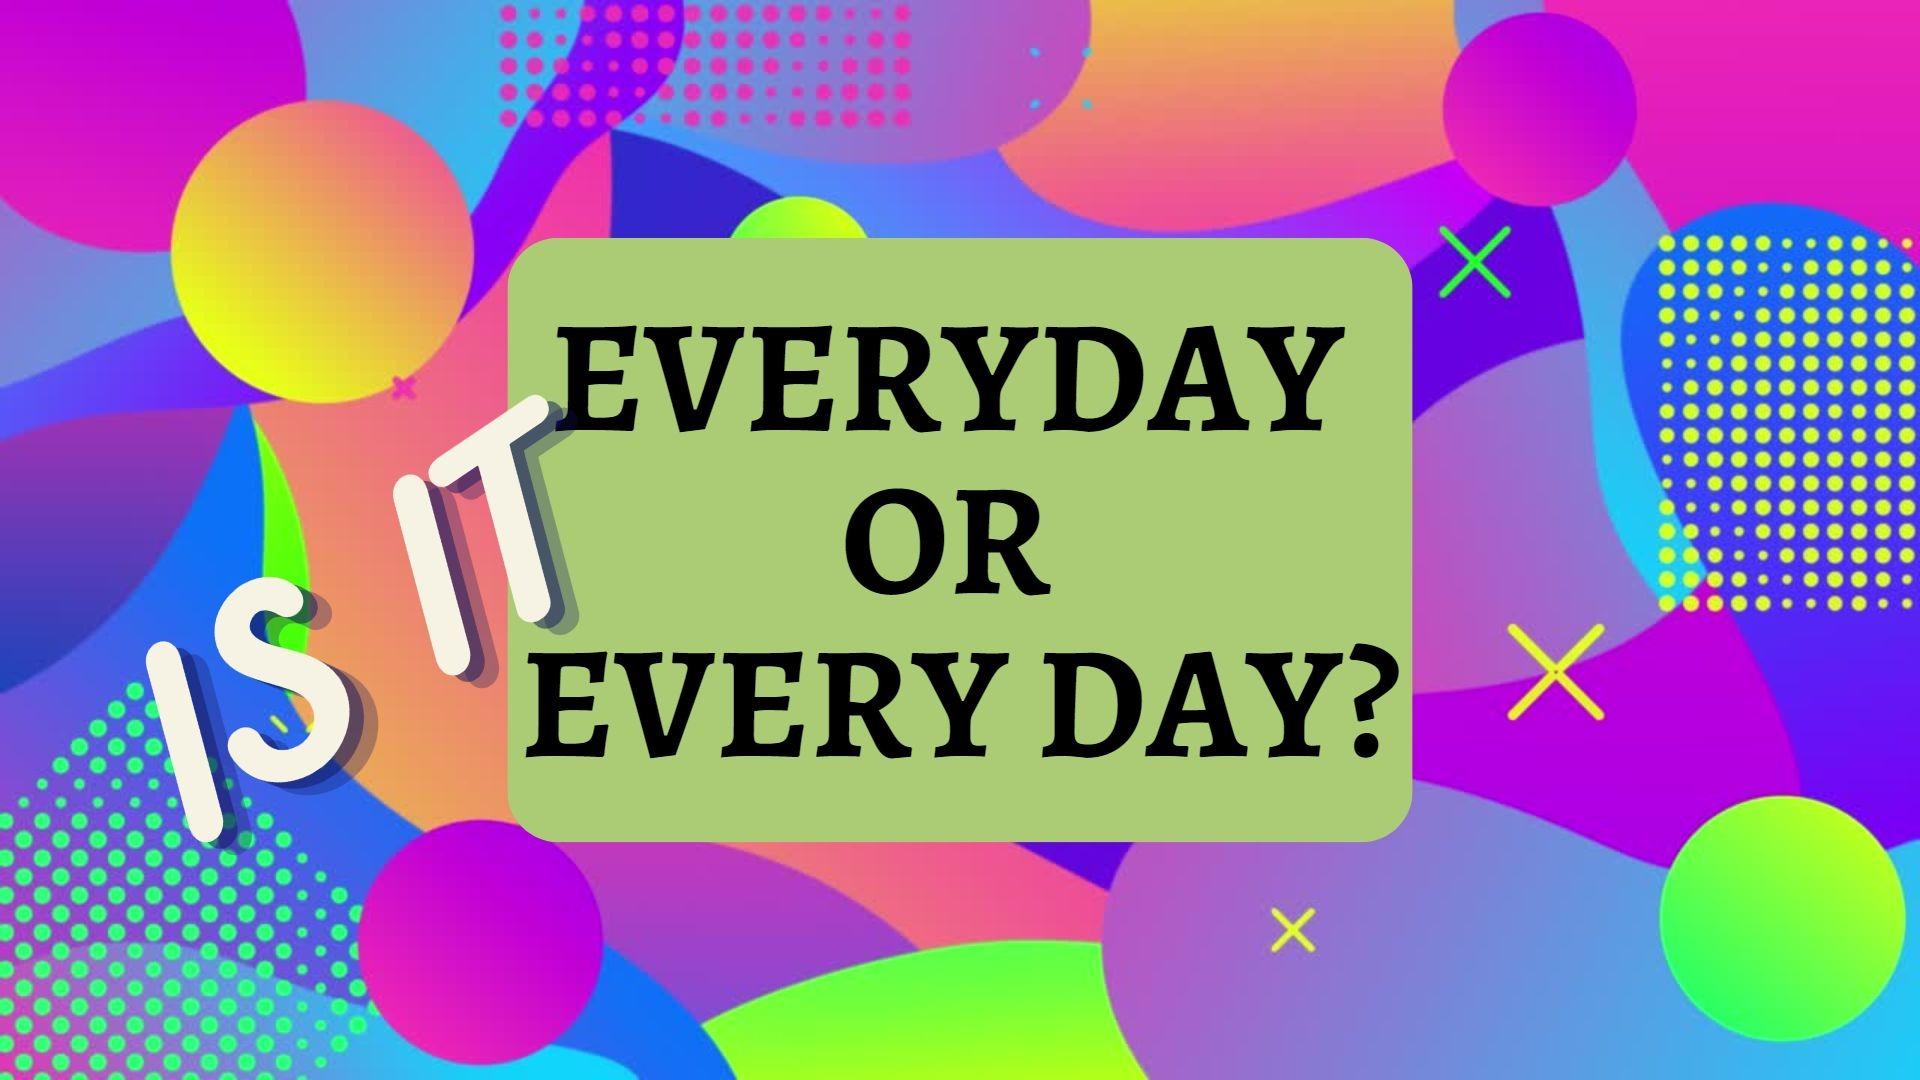 Is it EVERYDAY or EVERY DAY?